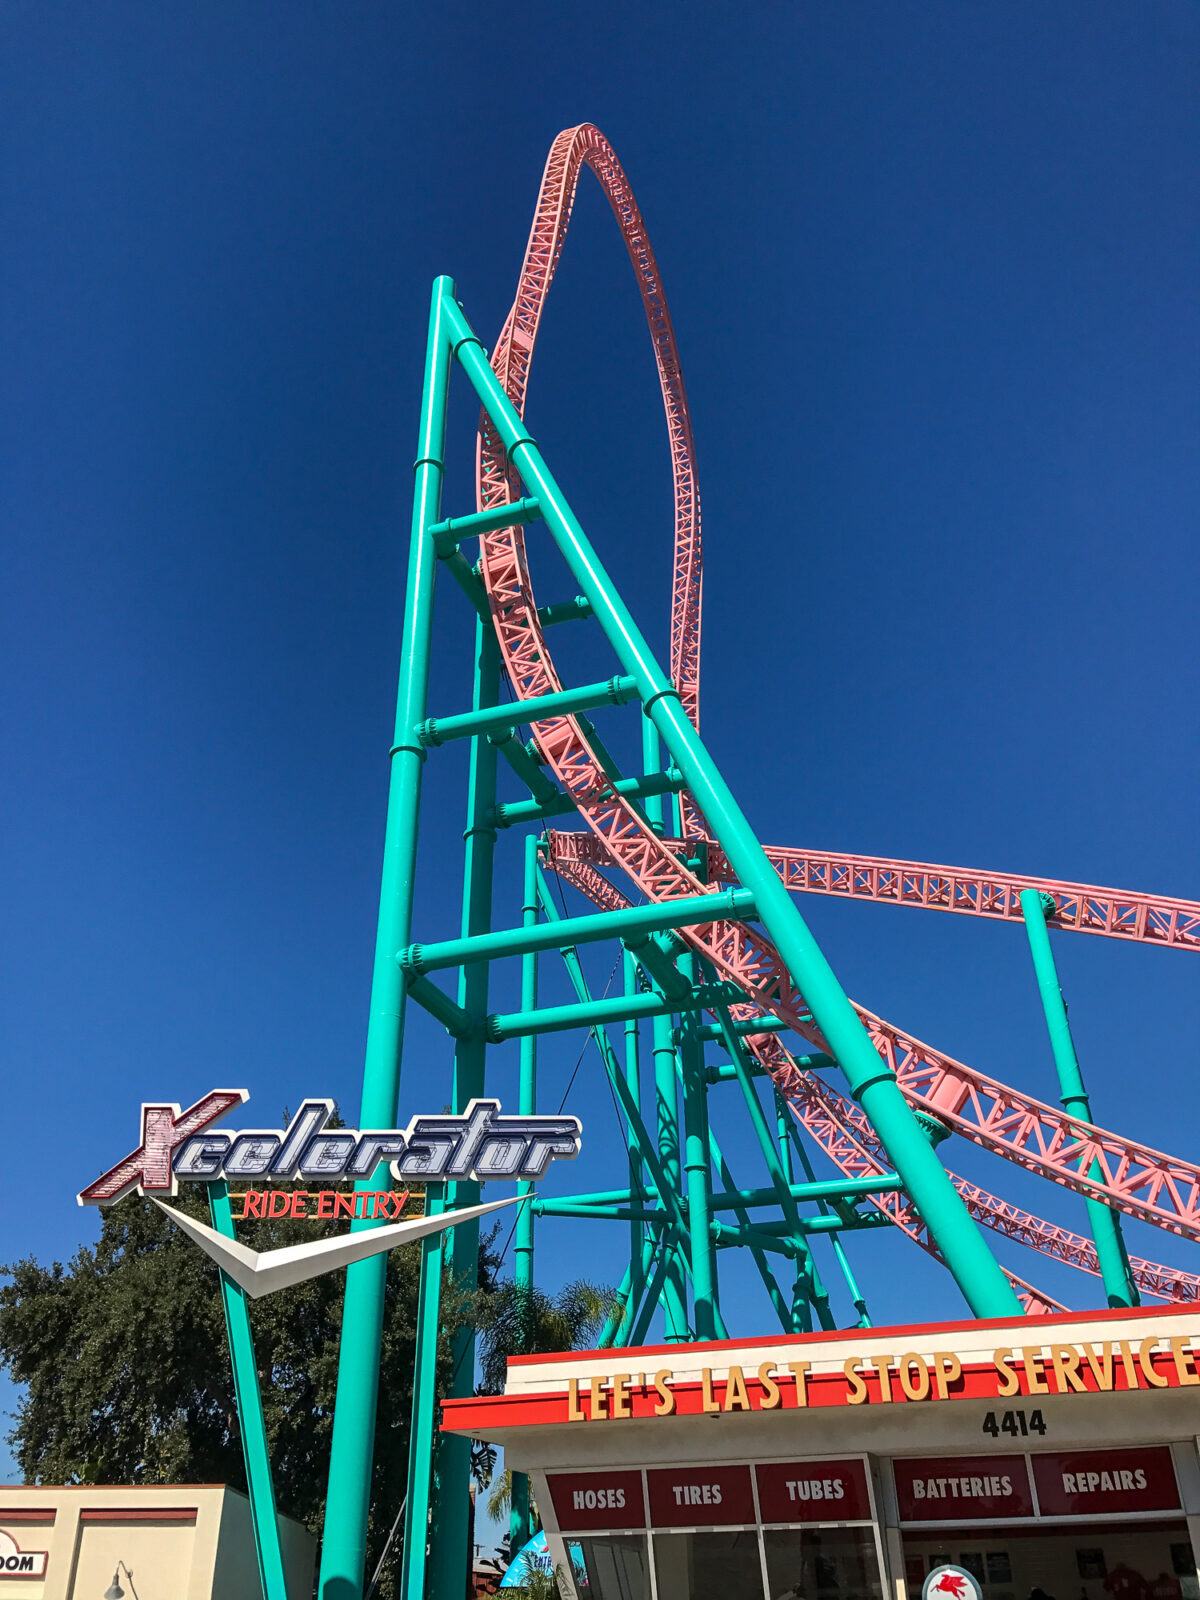 Xcelerator, one of the fastest rides at Knott's Berry Farm